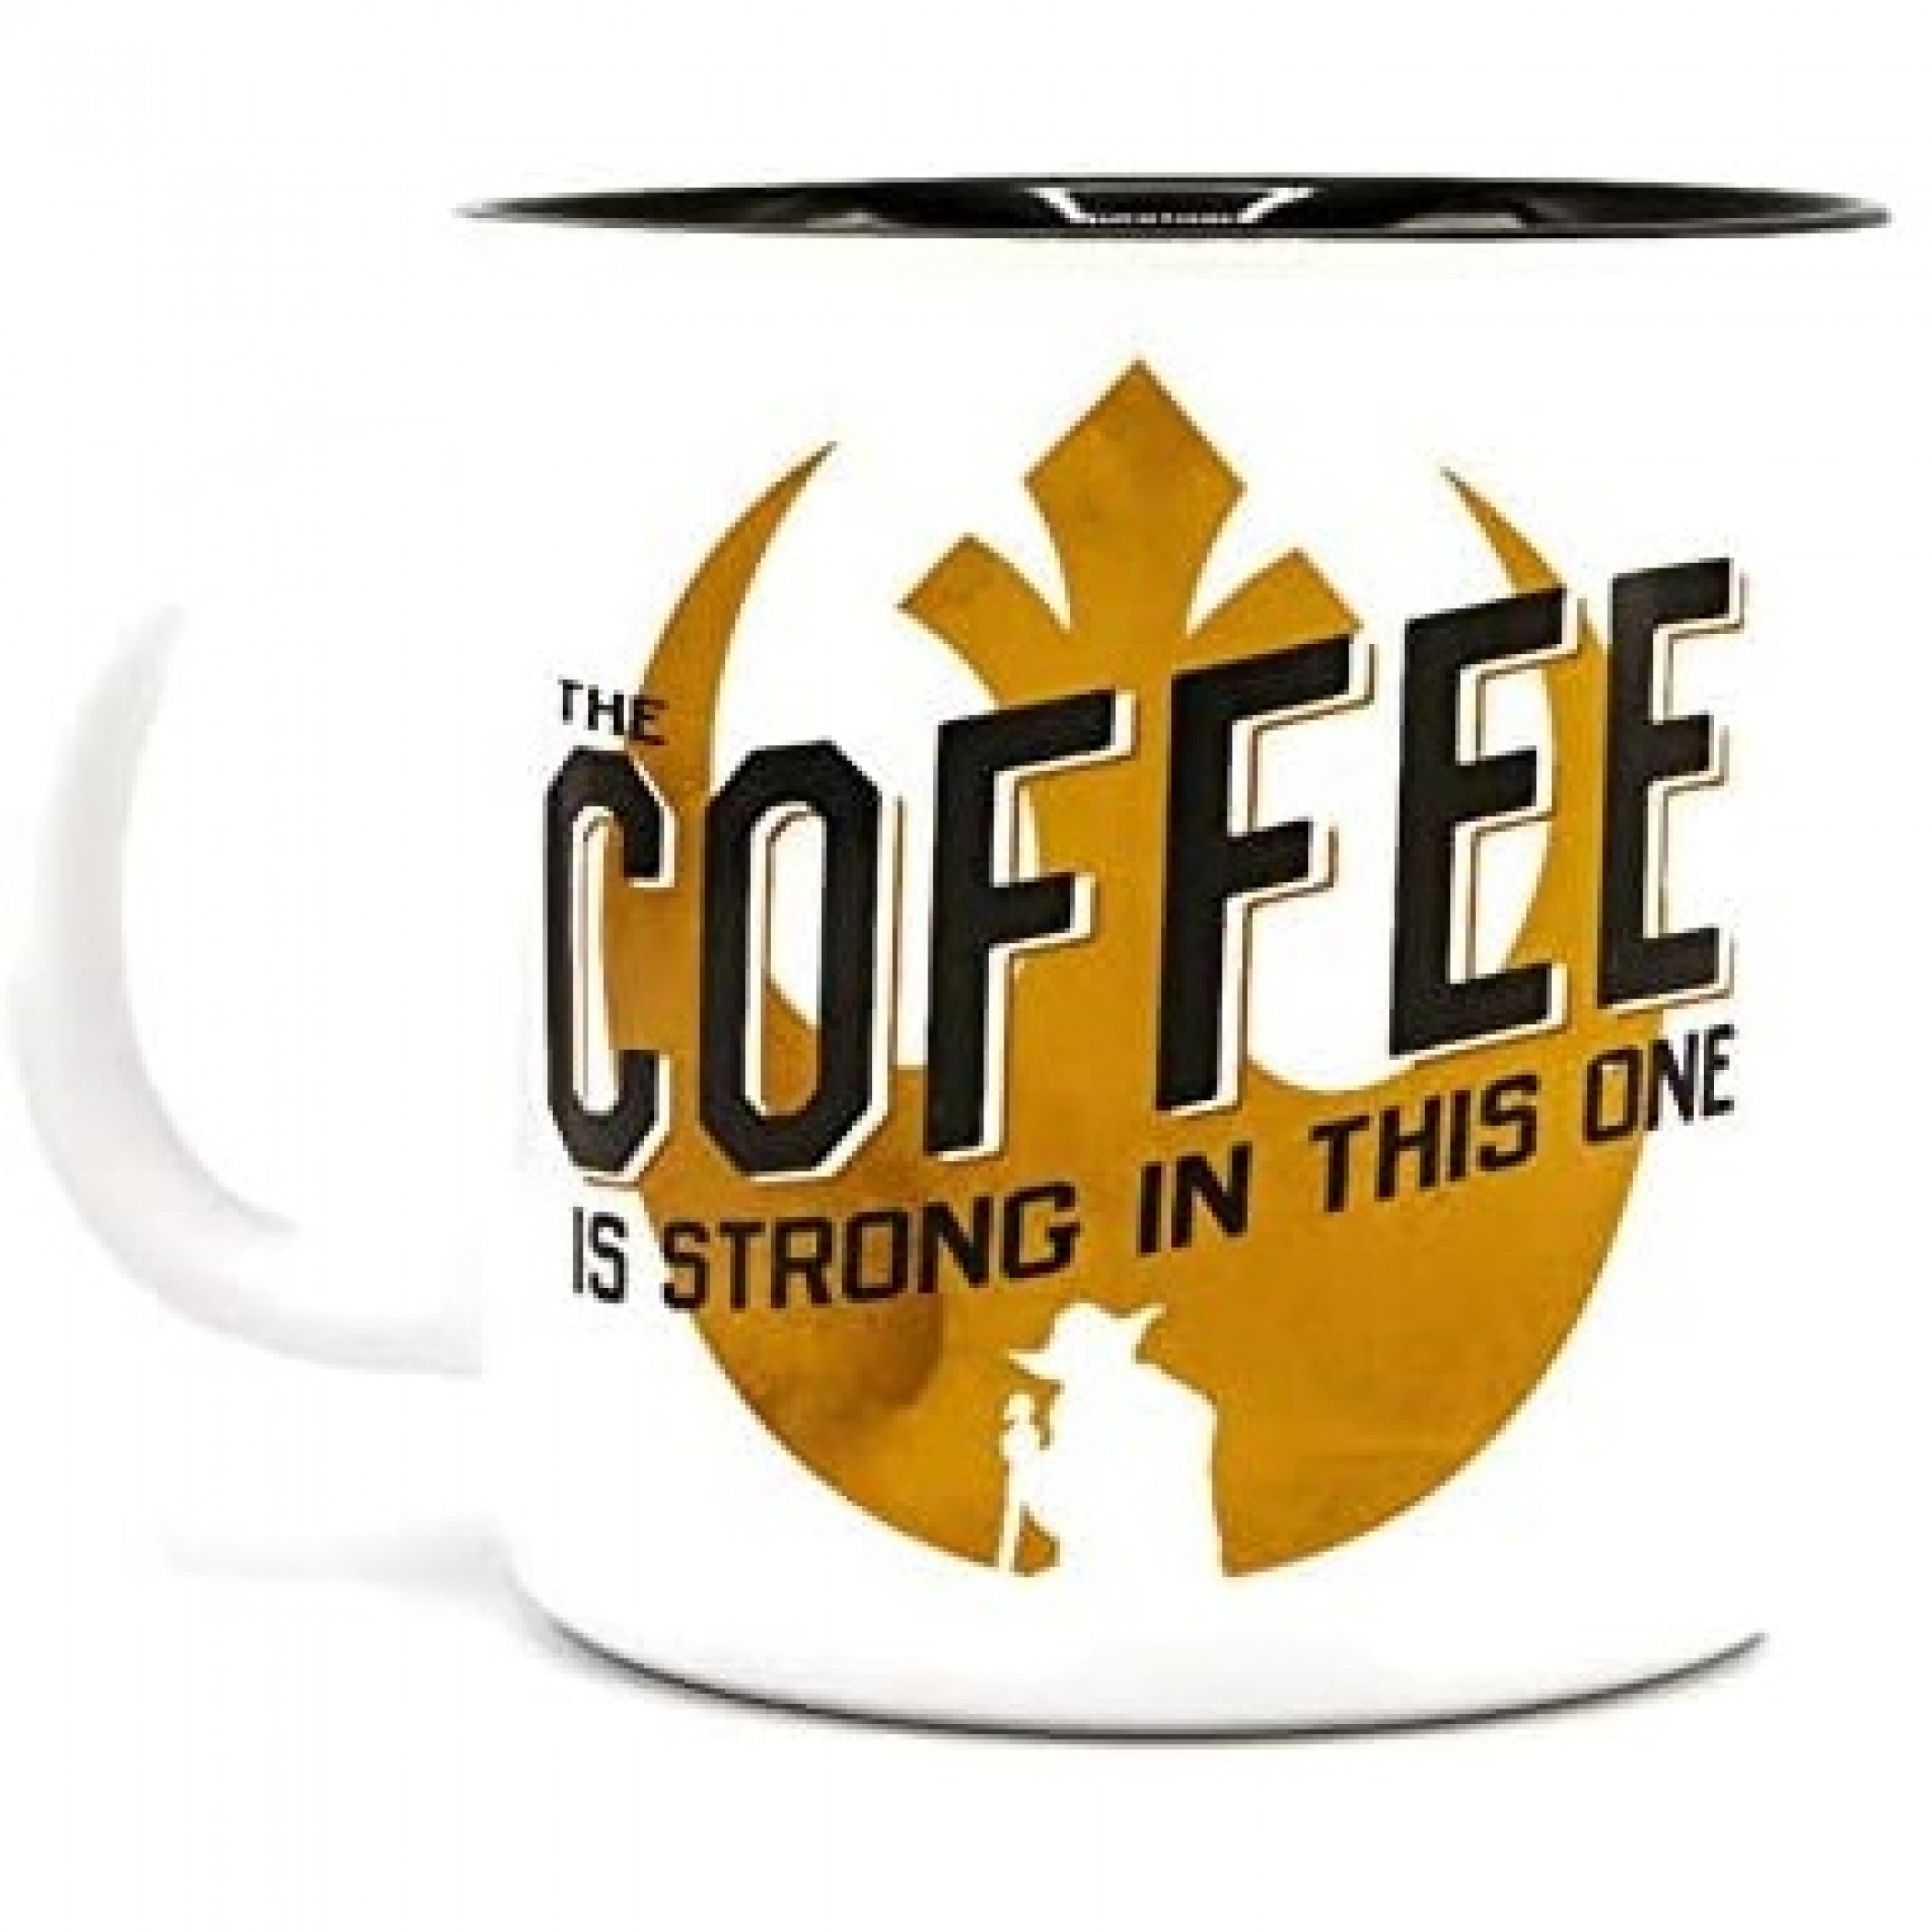 Star Wars The Coffee is Strong in This One 20 Ounce Mug